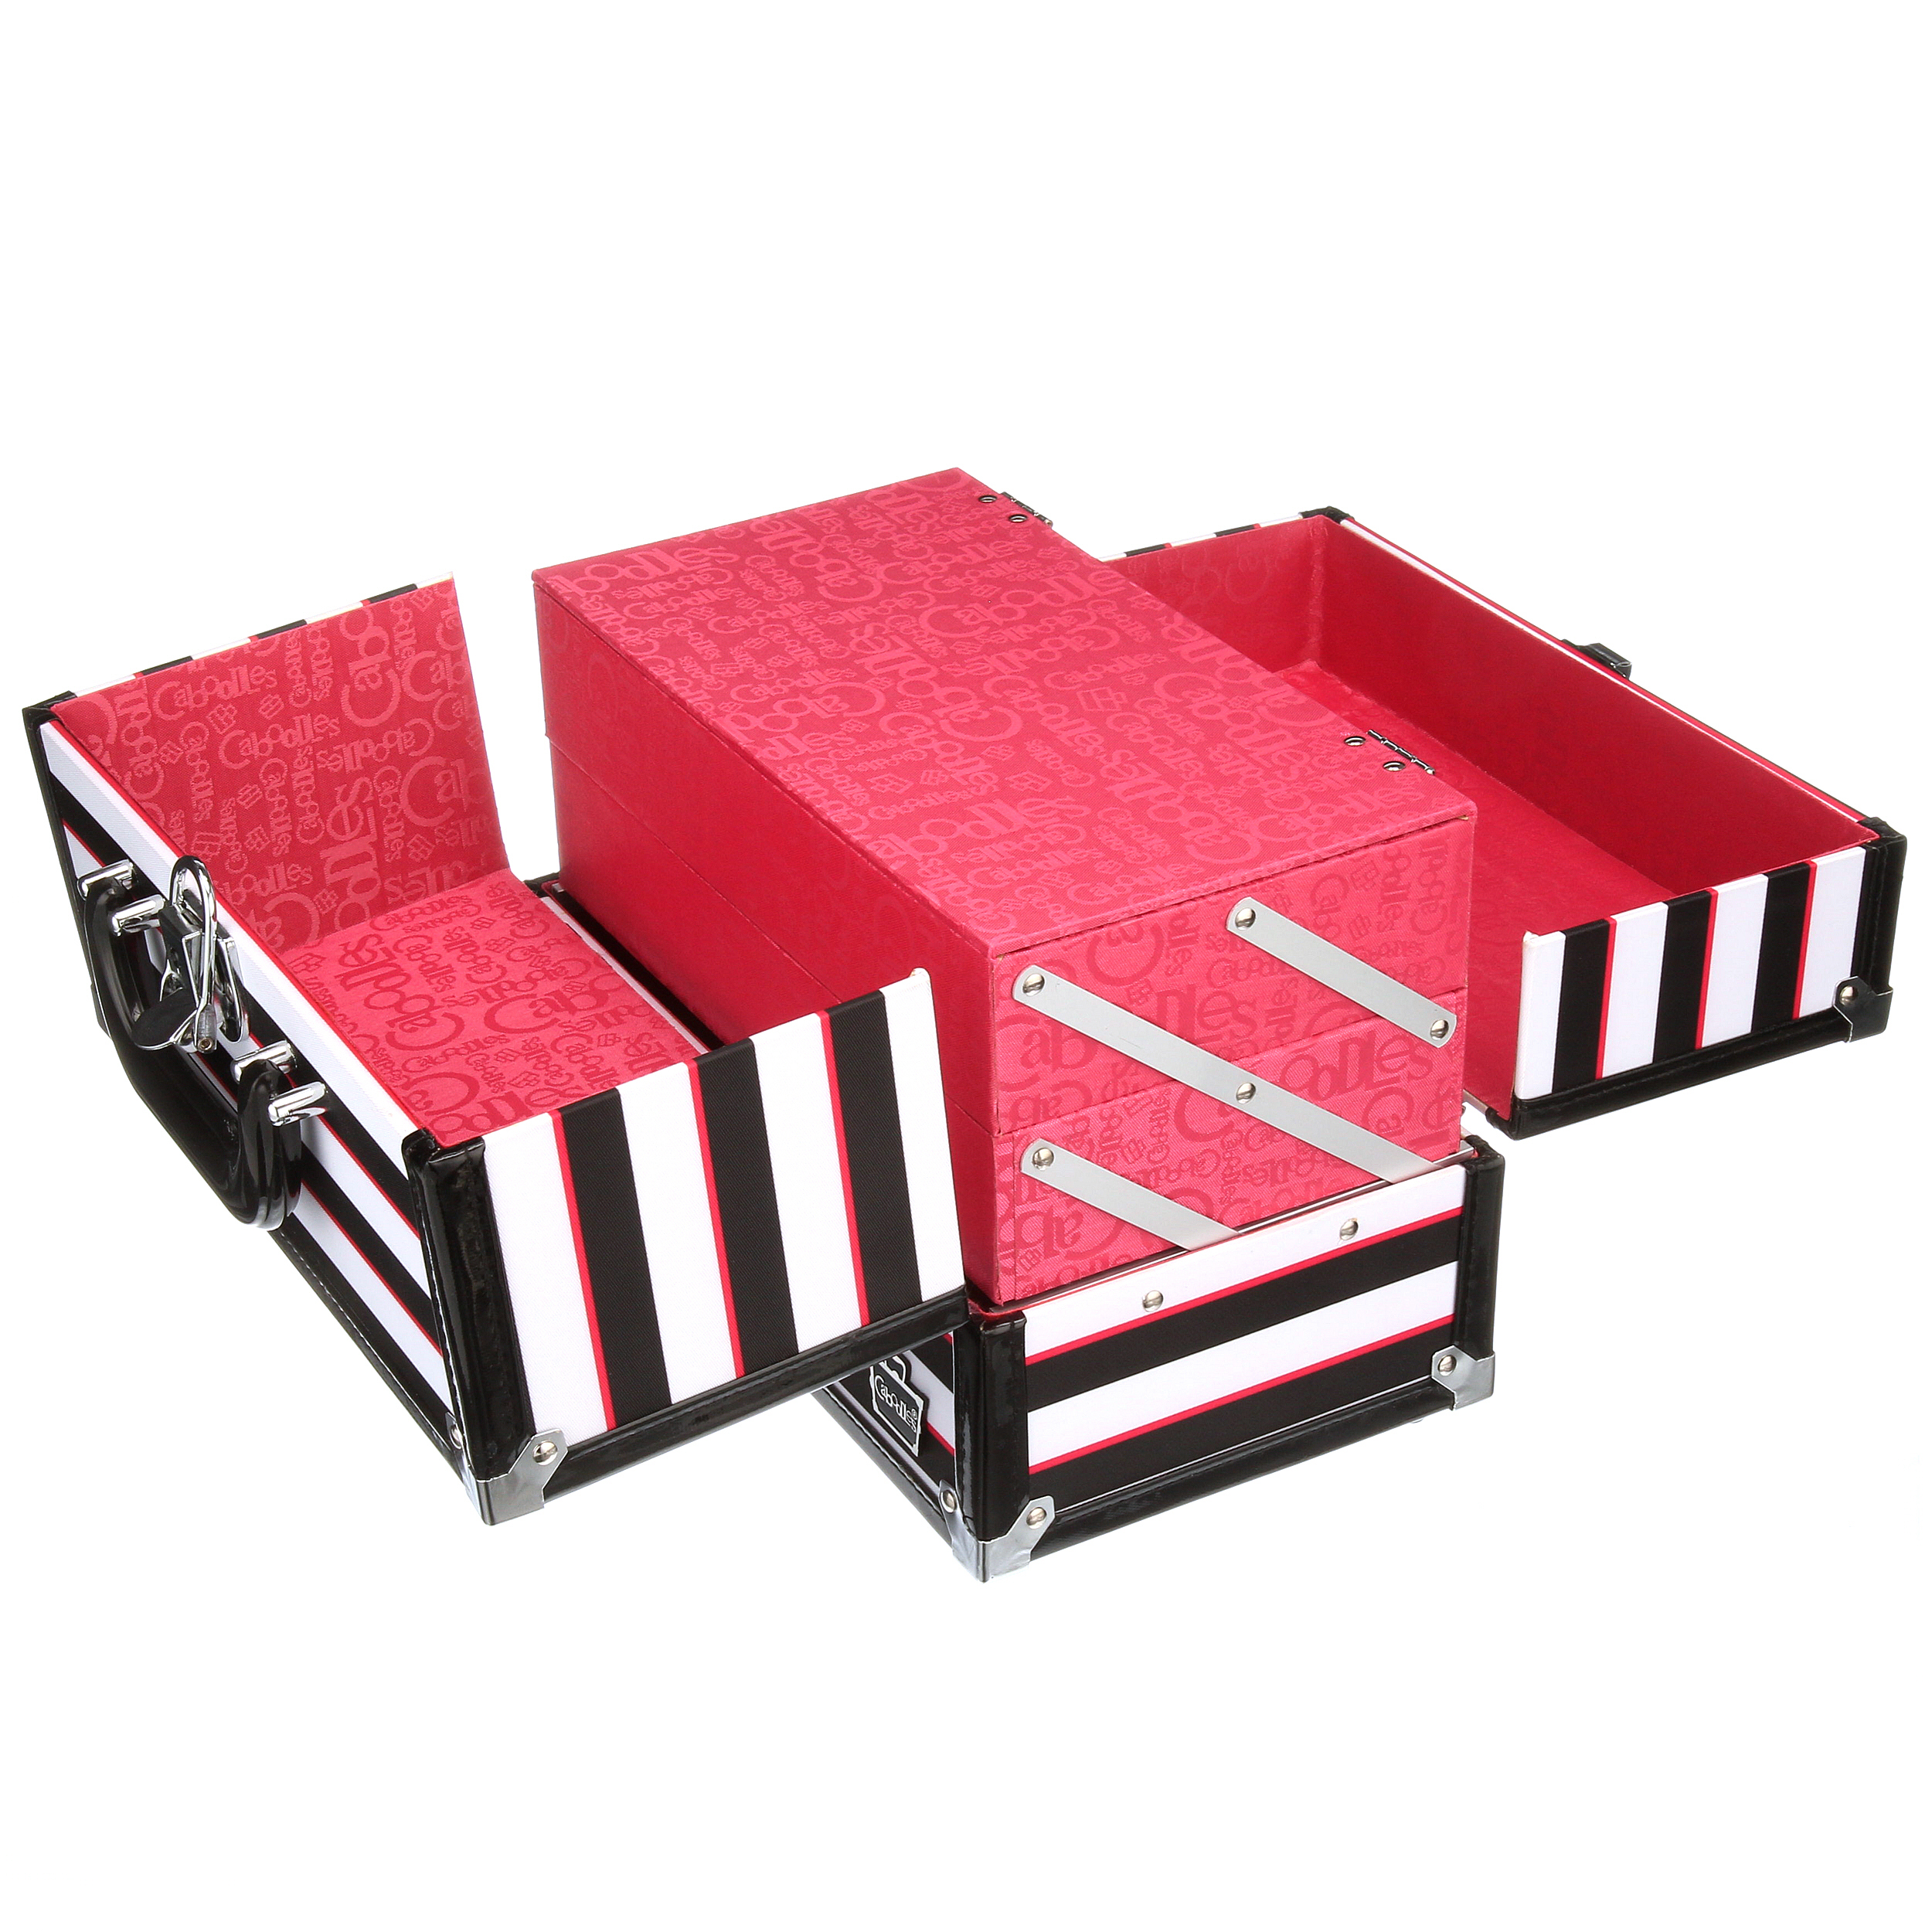 Caboodles Inspired Makeup Case, 2 Tray, Multi Color Striped - image 4 of 7